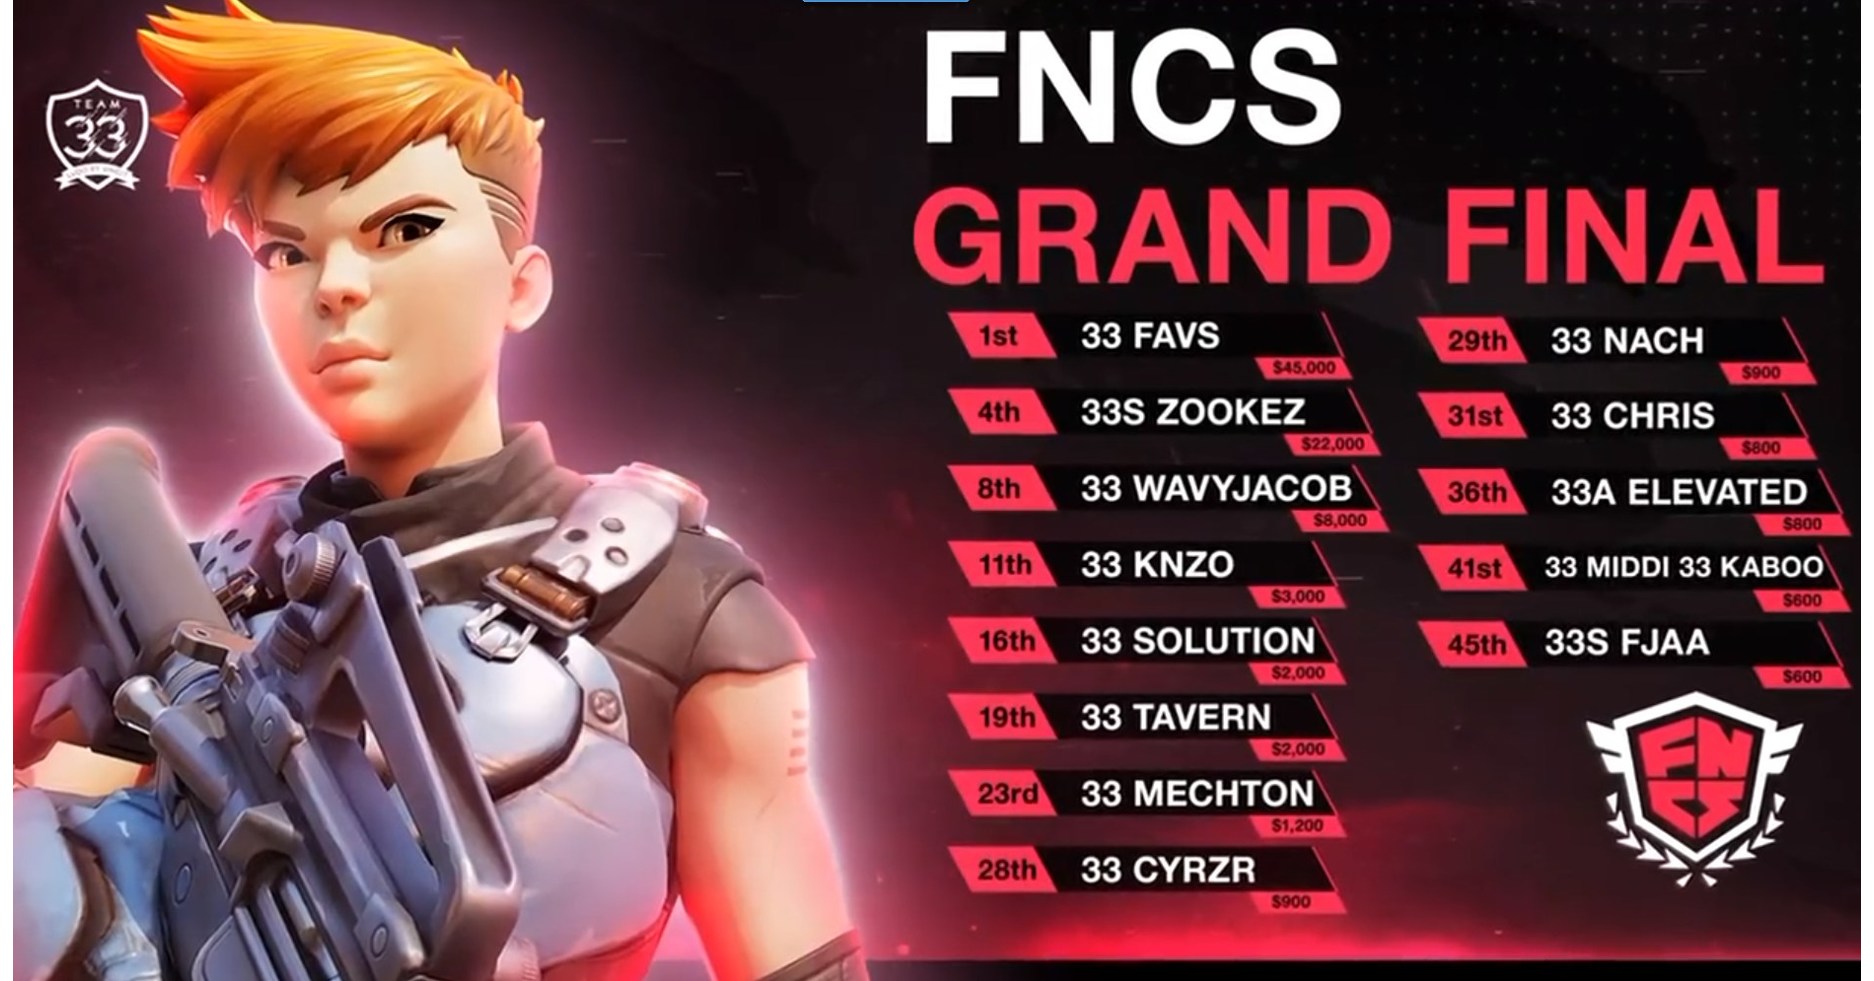 Team 33 Makes Fortnite History as the First Team to Win Two FNCS